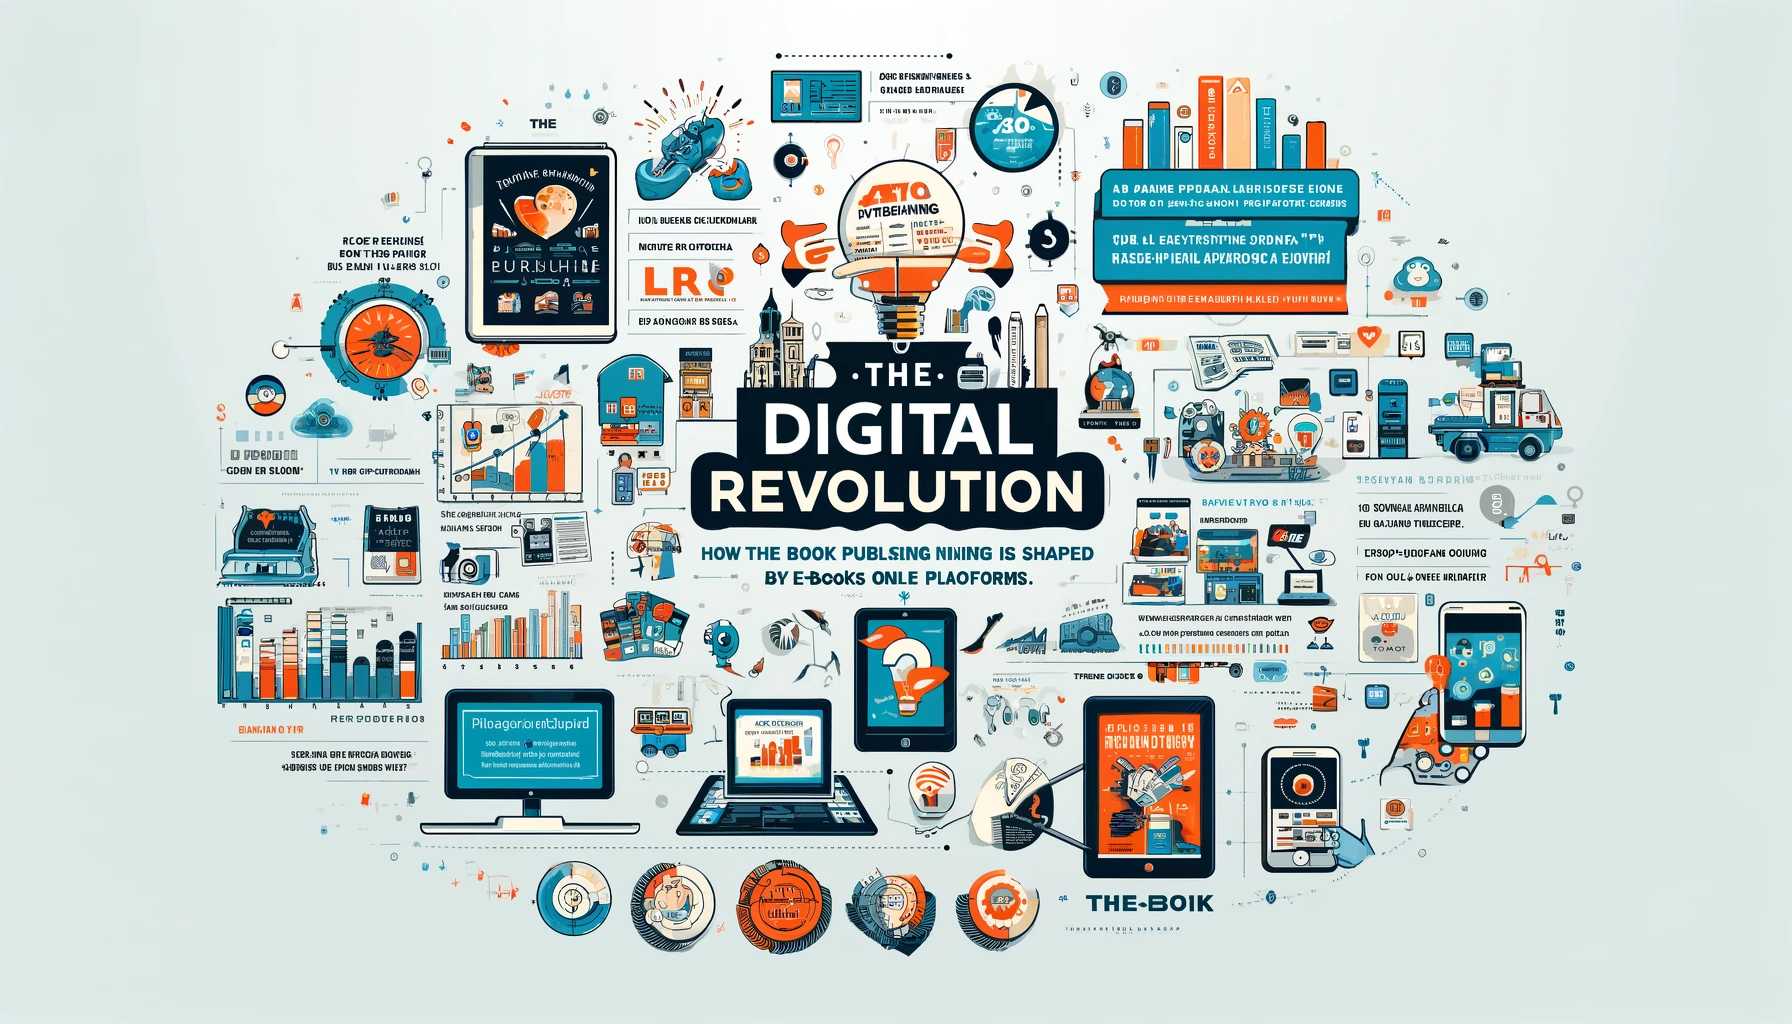 THE DIGITAL REVOLUTION: HOW THE BOOK PUBLISHING INDUSTRY IS BEING SHAPED BY E-BOOKS AND ONLINE PLATFORMS